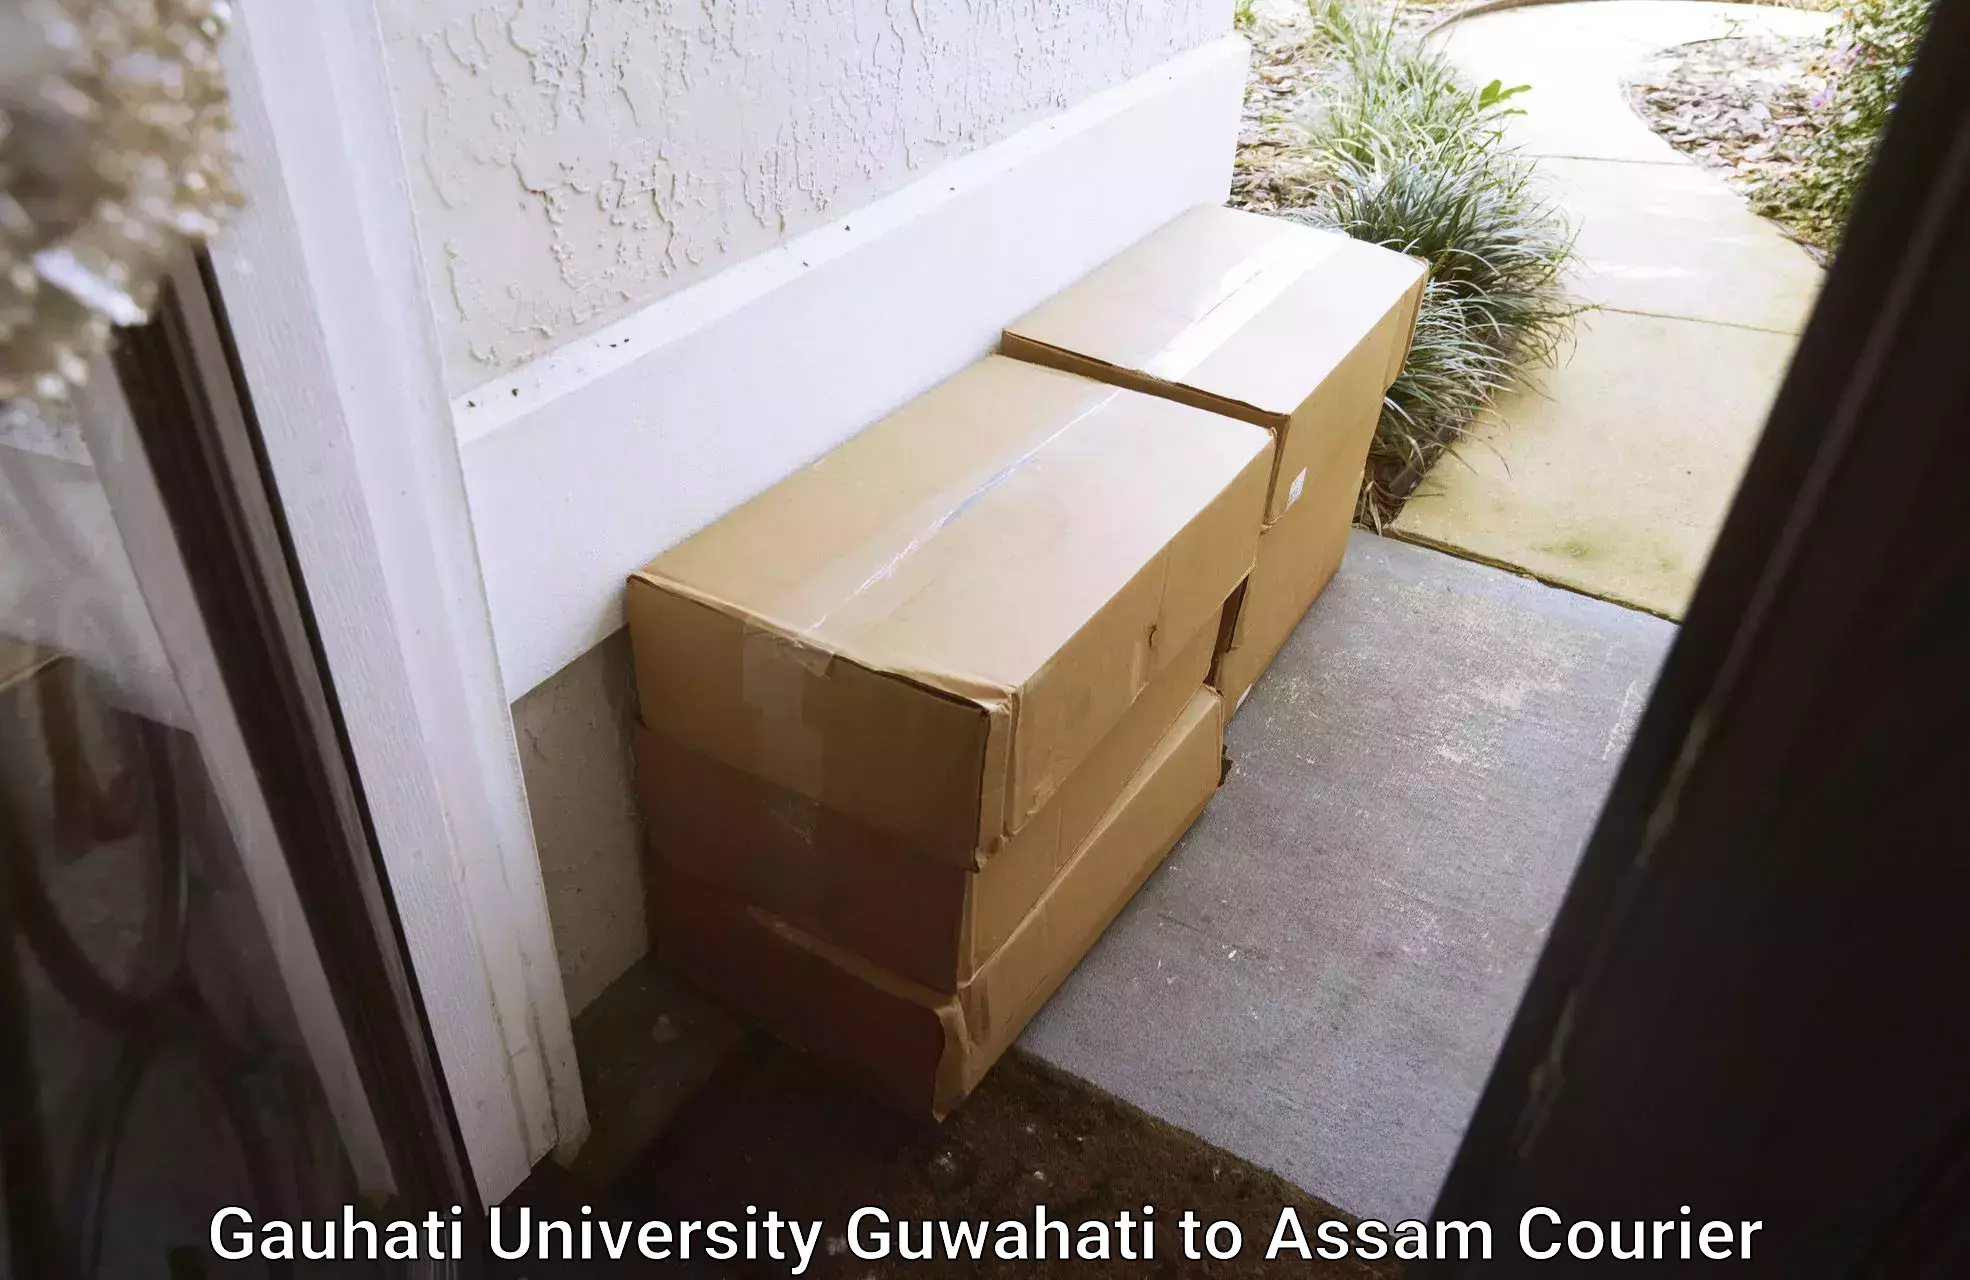 Reliable courier service Gauhati University Guwahati to Assam